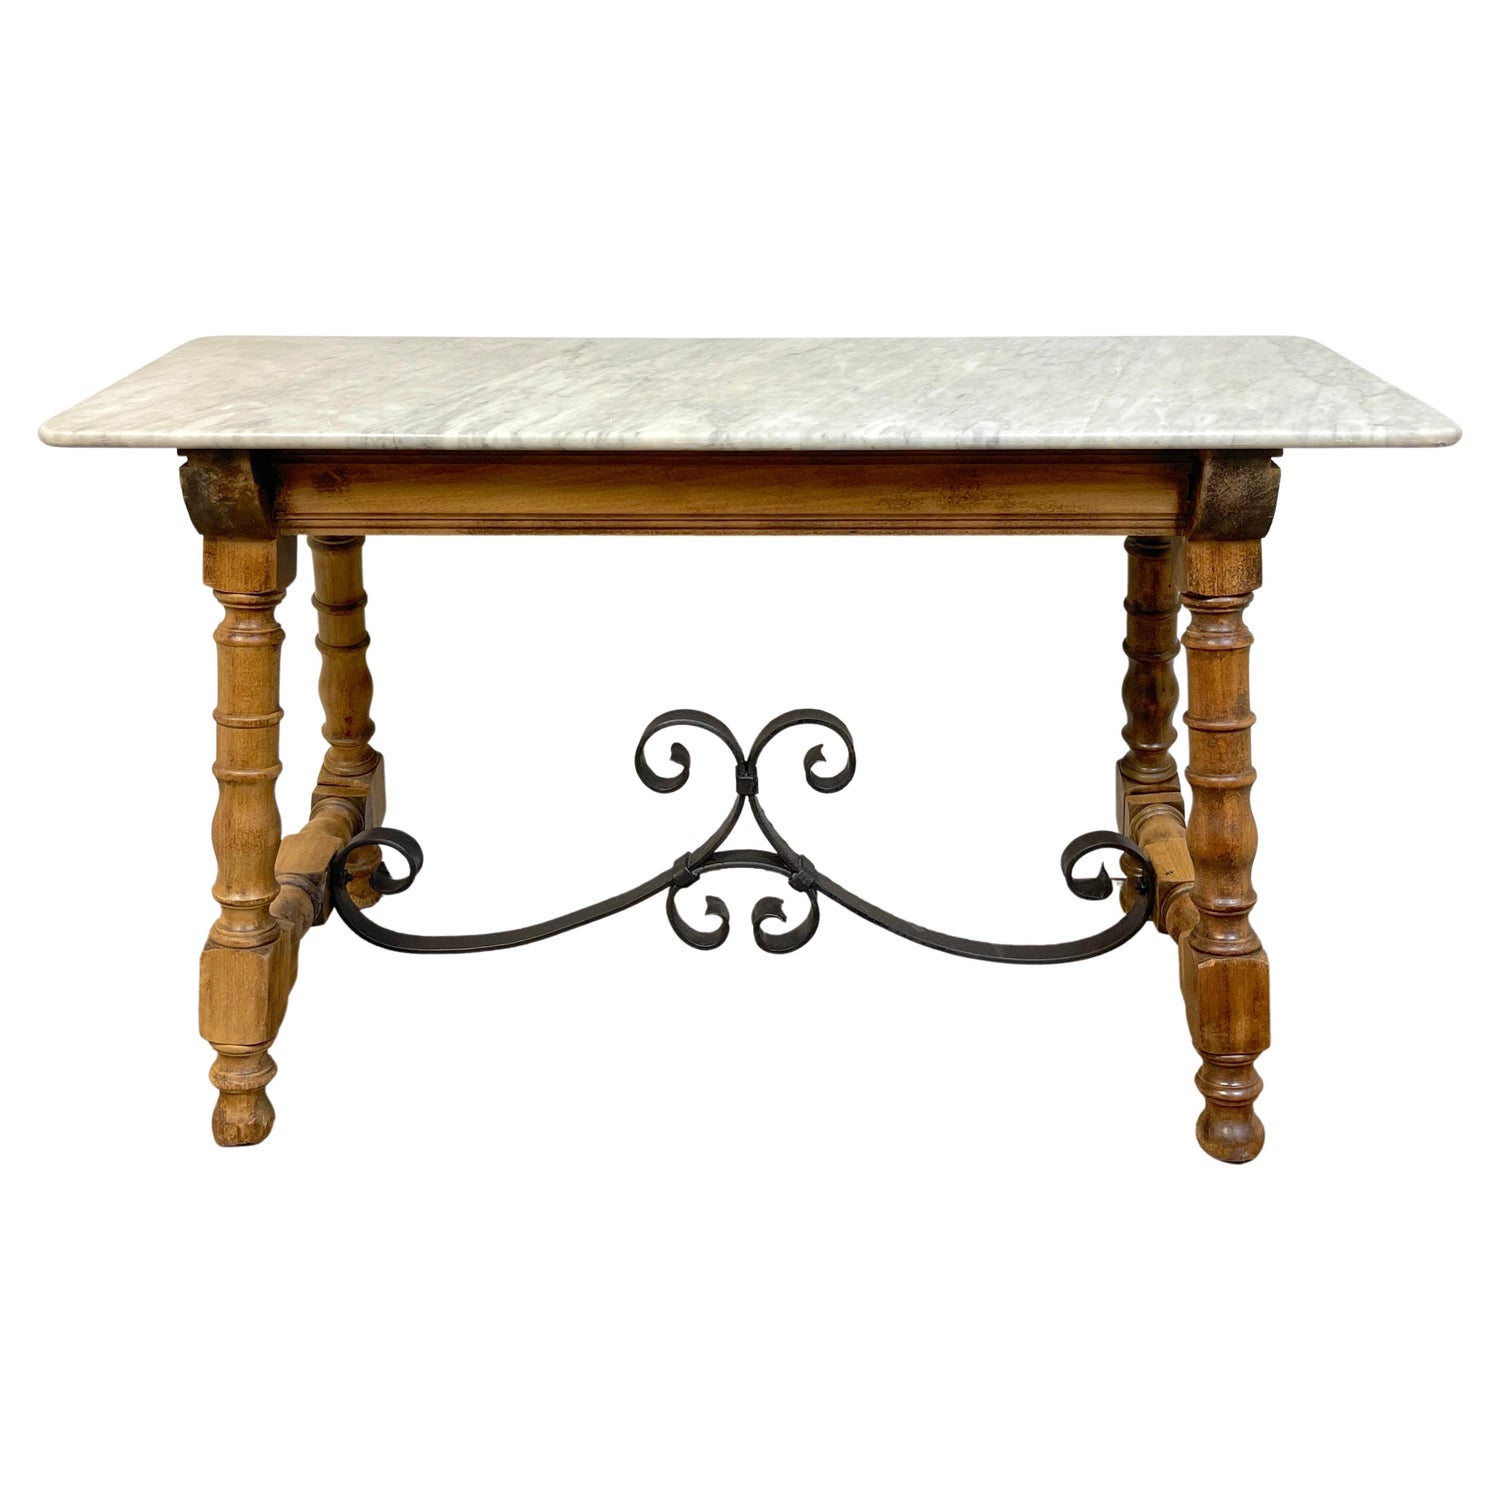 https://a.1stdibscdn.com/19th-century-country-french-marble-top-bleached-pine-iron-patisserie-console-for-sale/f_25923/f_298654321659660801857/f_29865432_1659660803160_bg_processed.jpg?width=1500